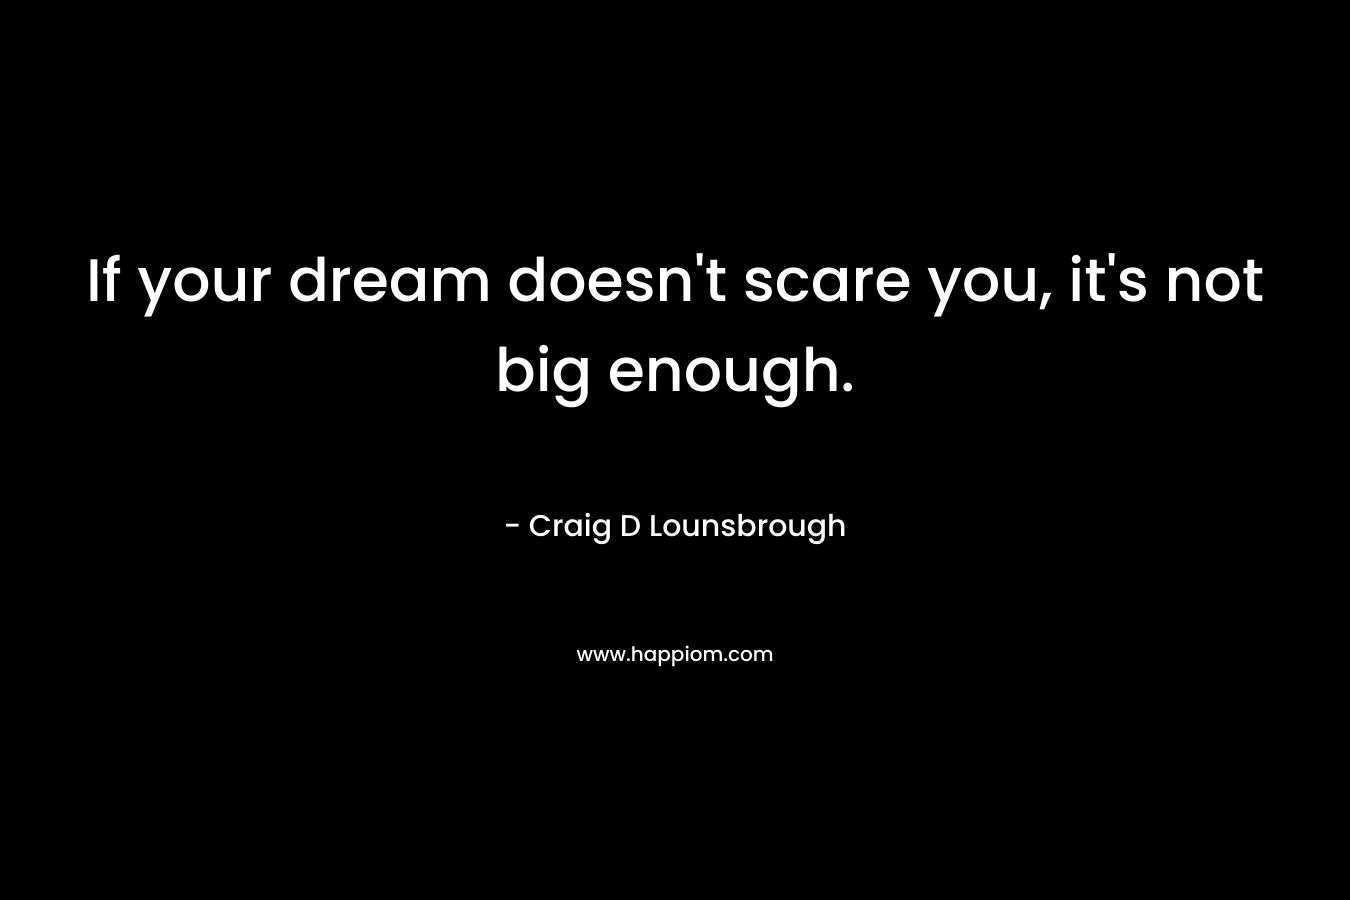 If your dream doesn't scare you, it's not big enough.